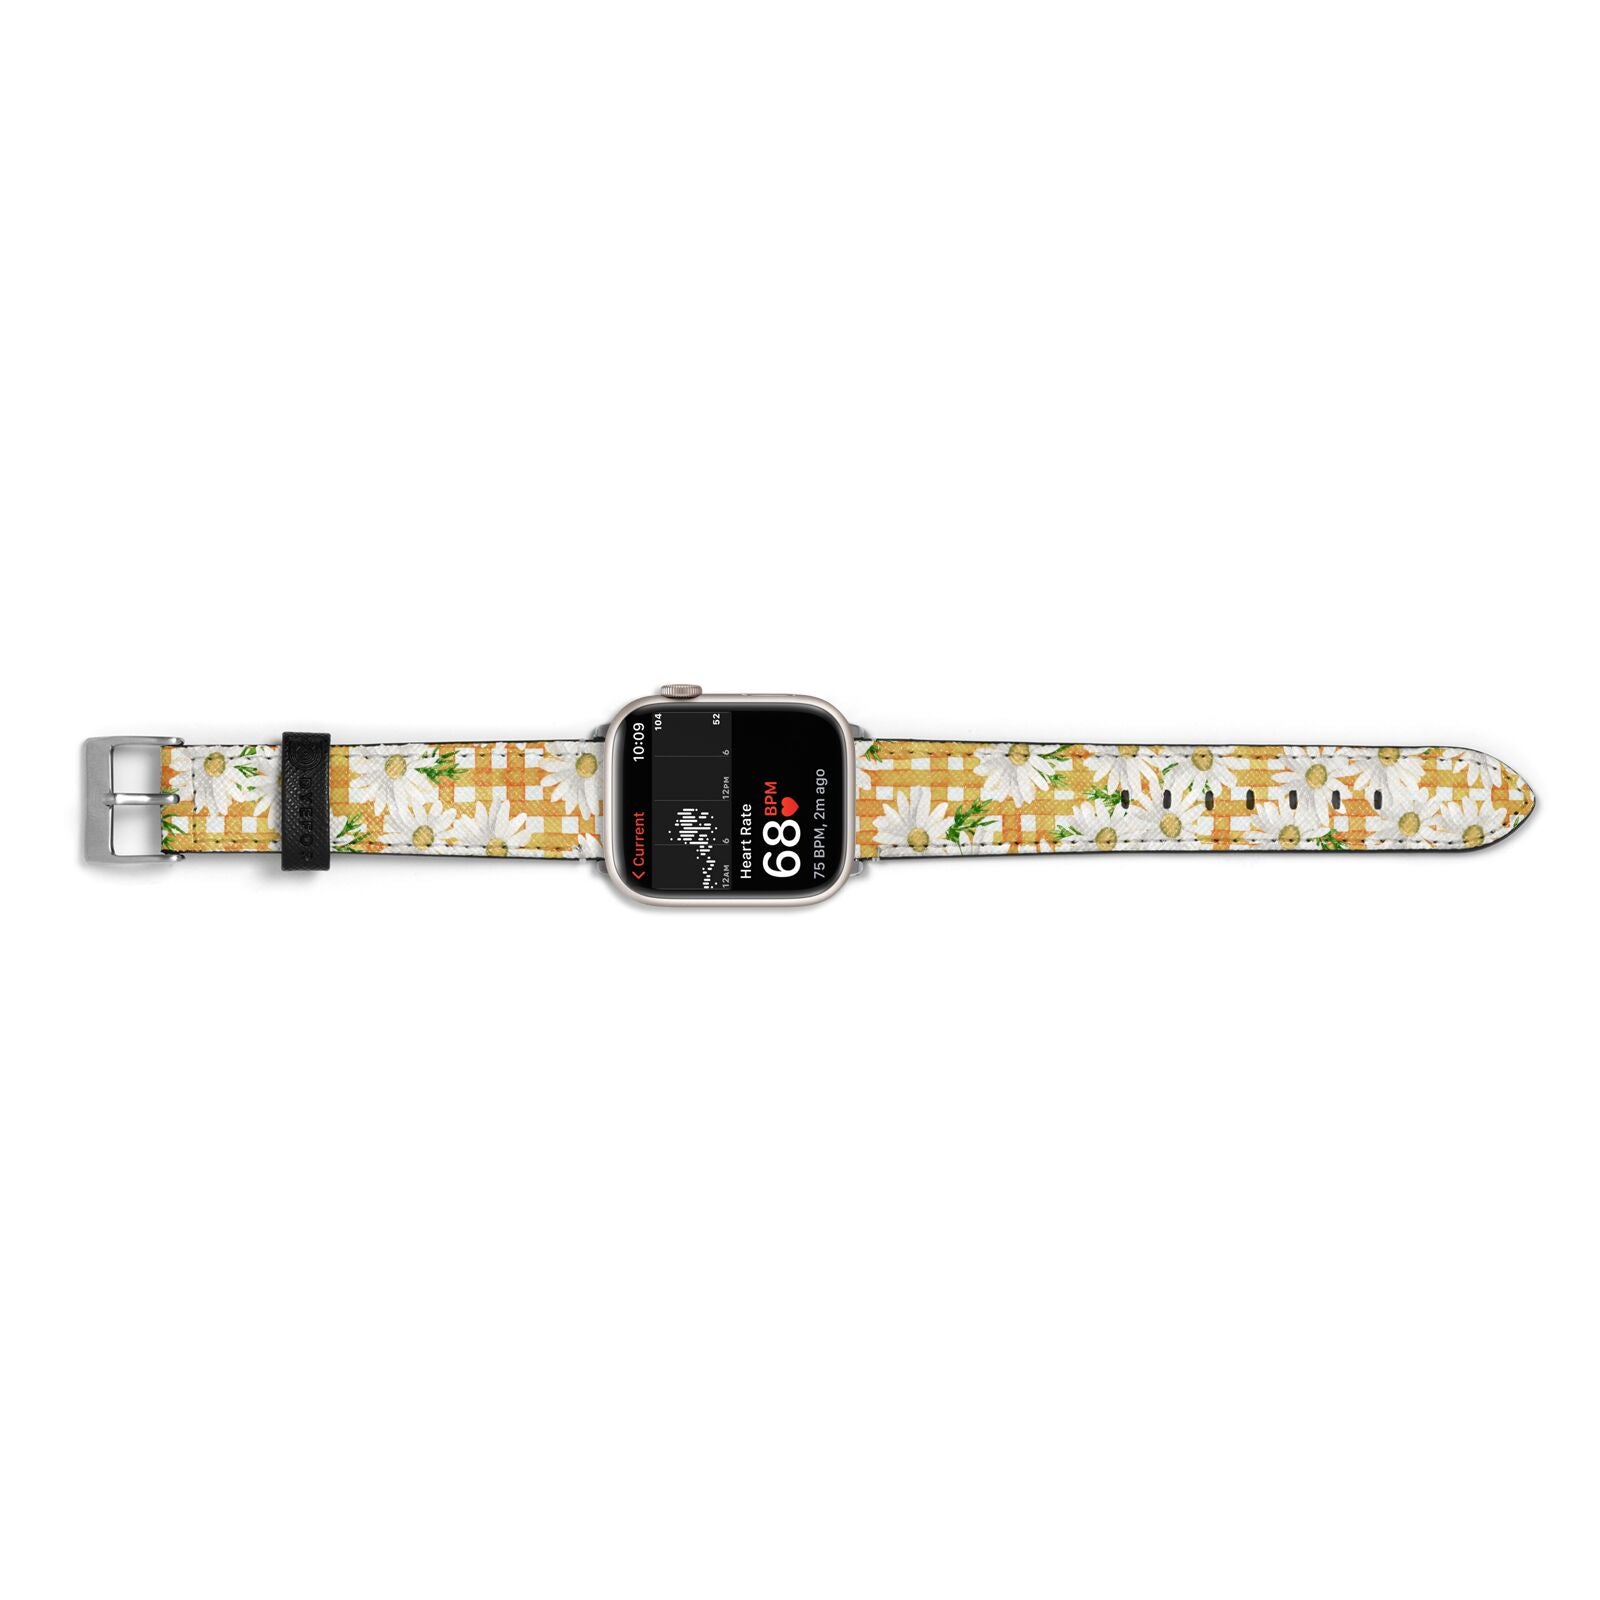 Checkered Daisy Apple Watch Strap Size 38mm Landscape Image Silver Hardware